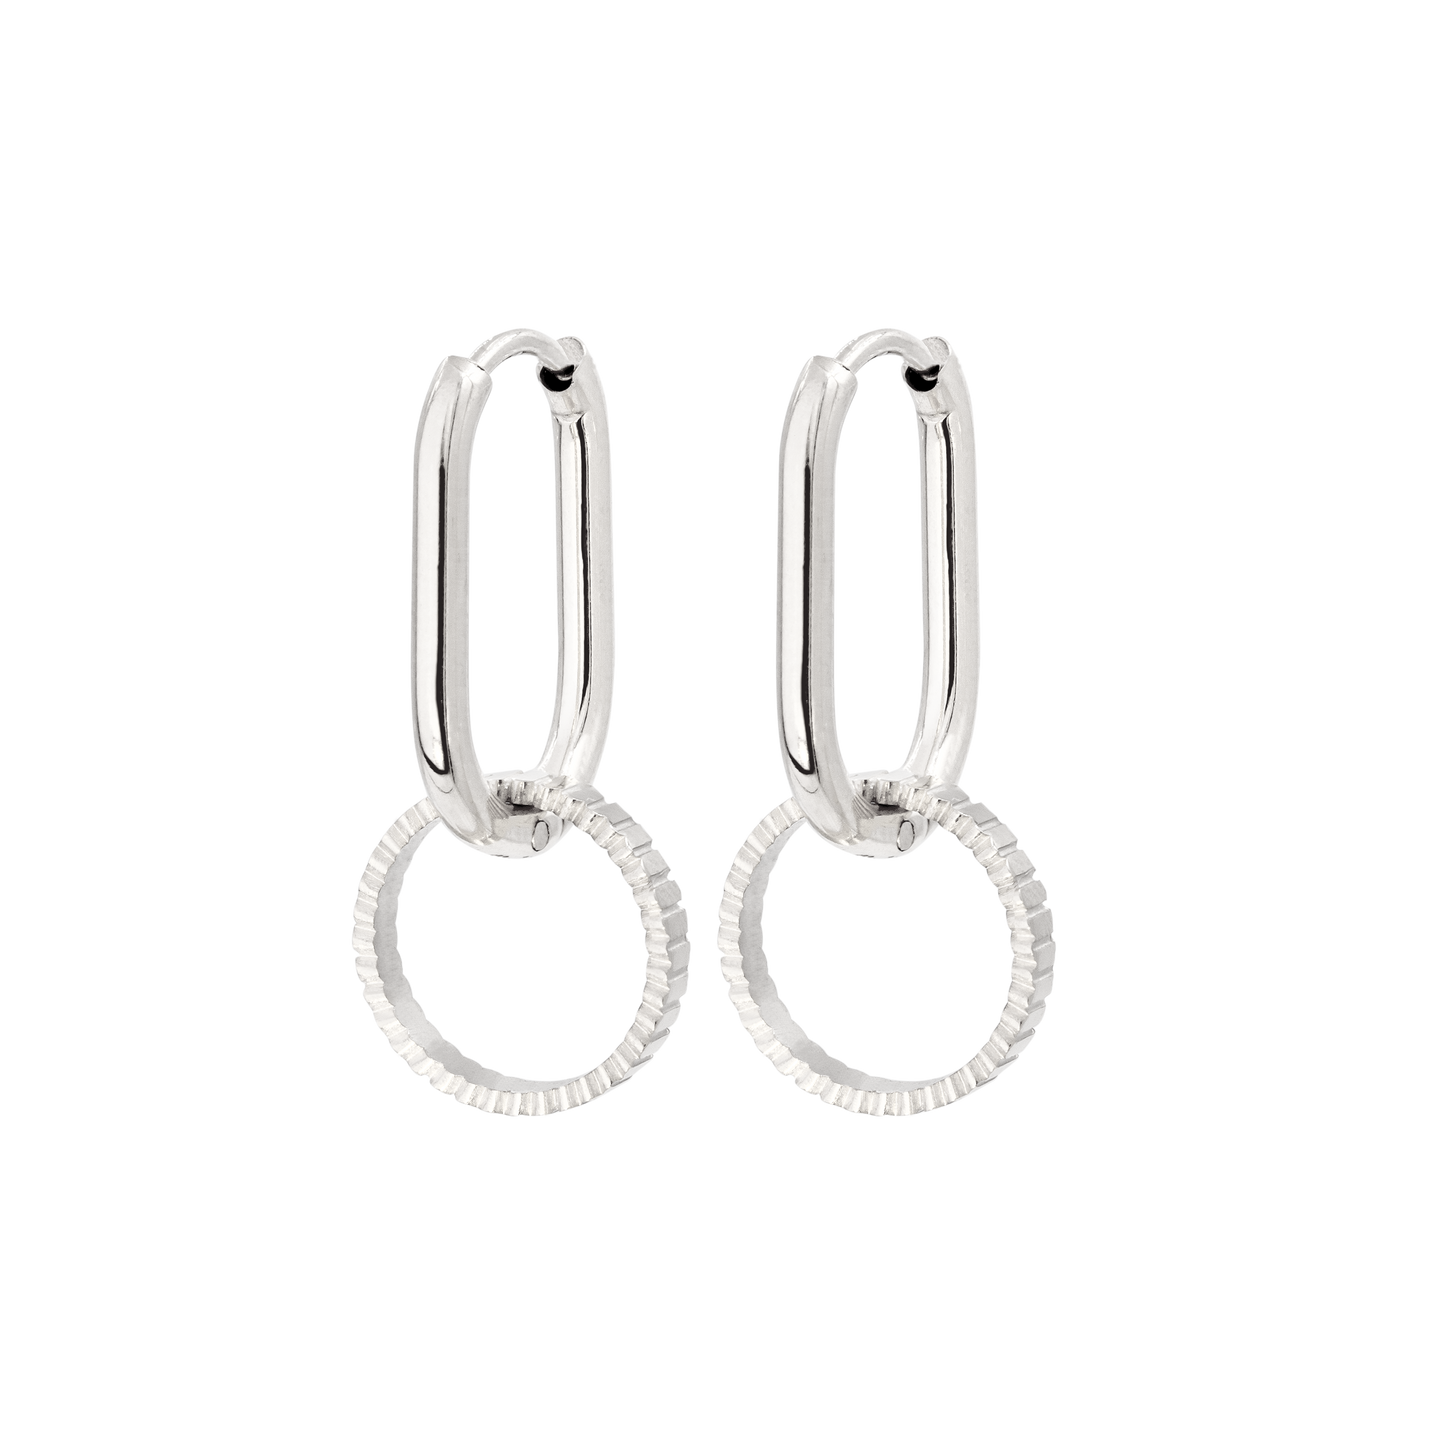 Oval Hoops and Stripes Silber